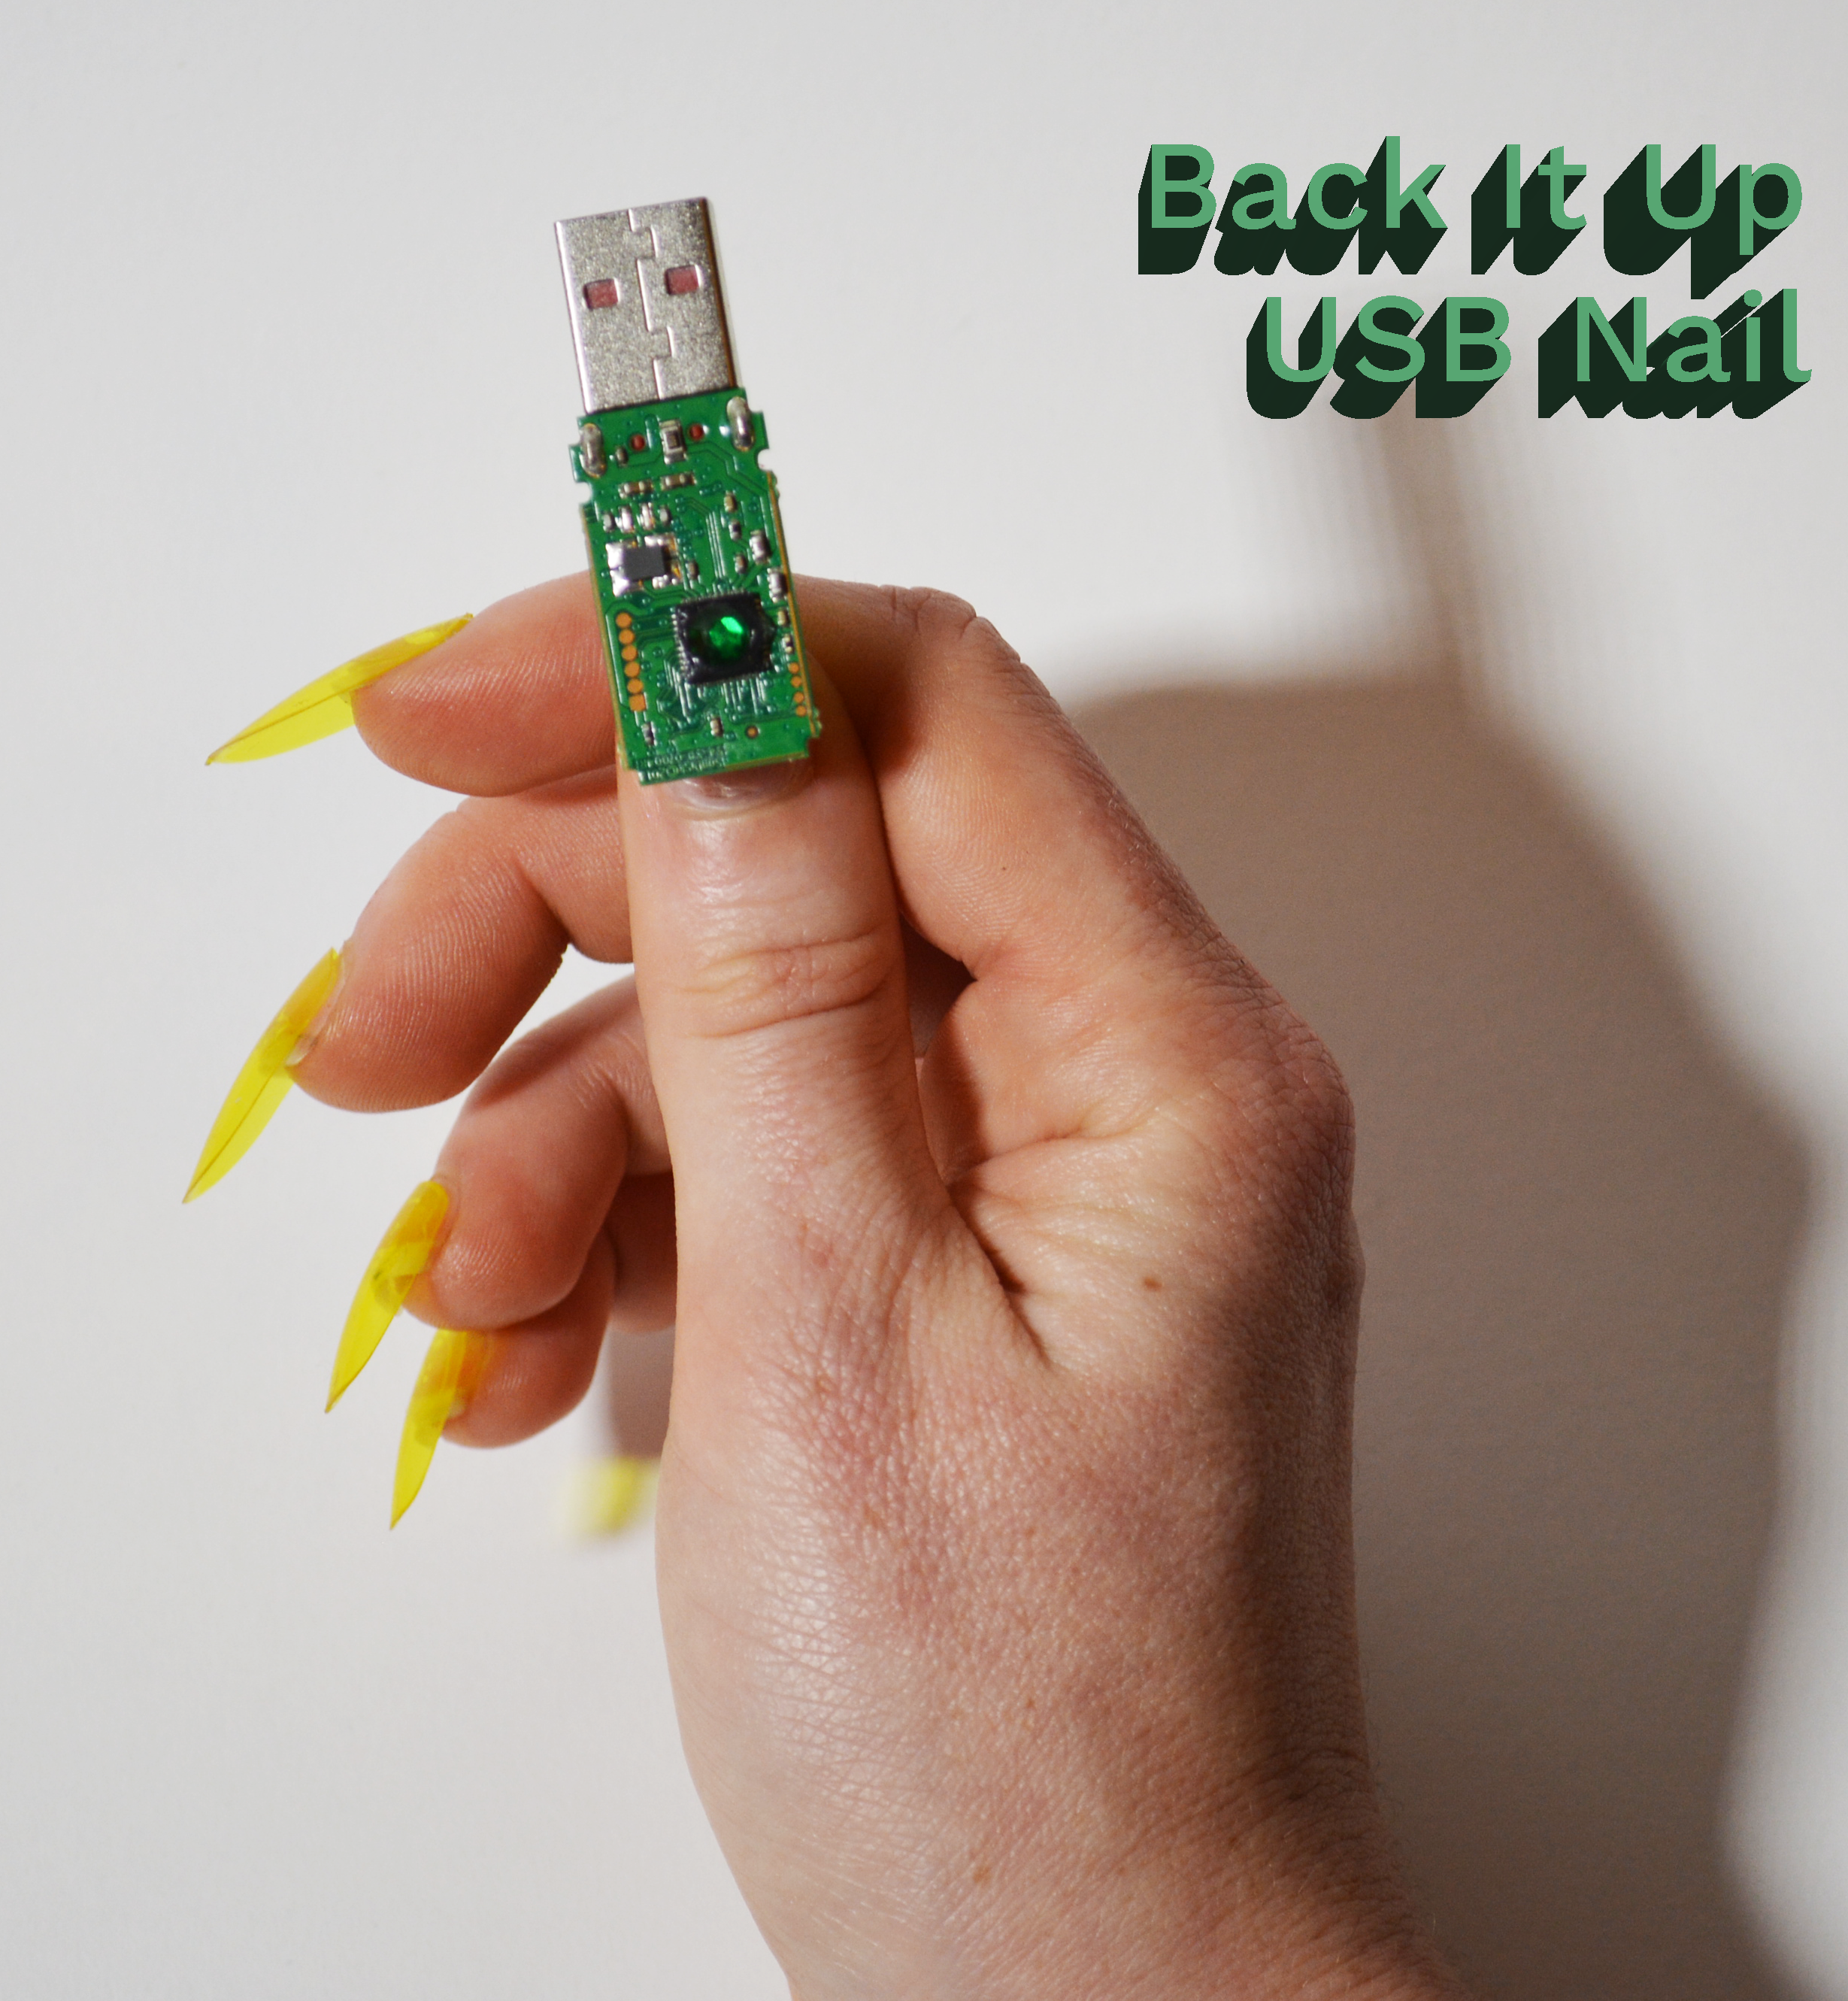 USBNailwithTitle.png